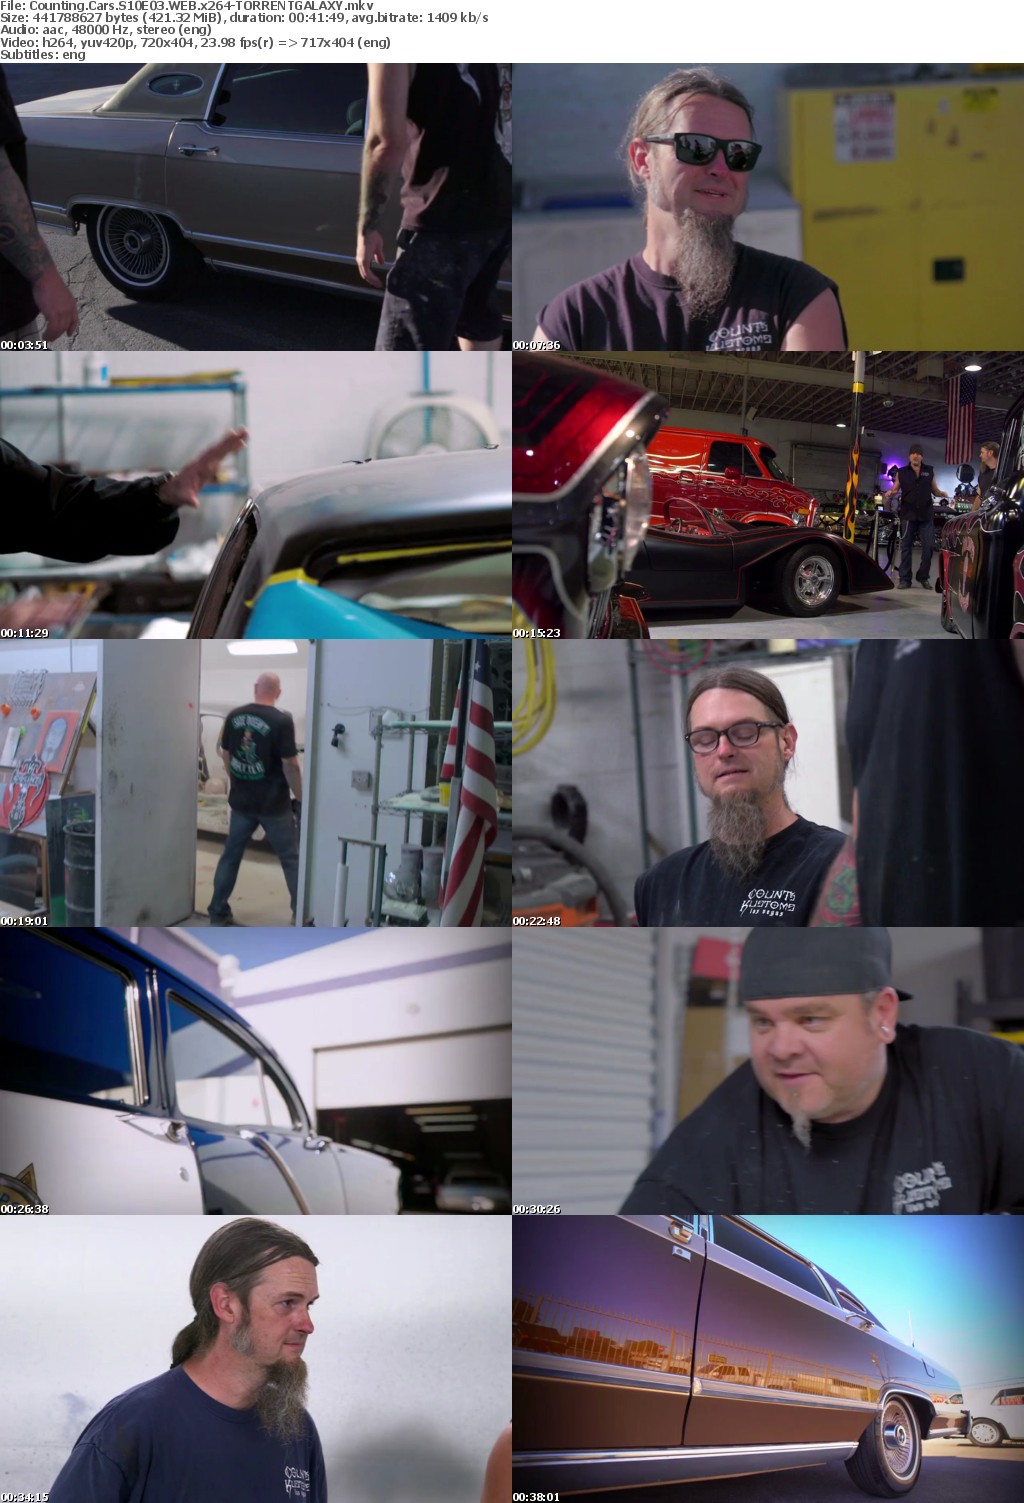 Counting Cars S10E03 WEB x264-GALAXY